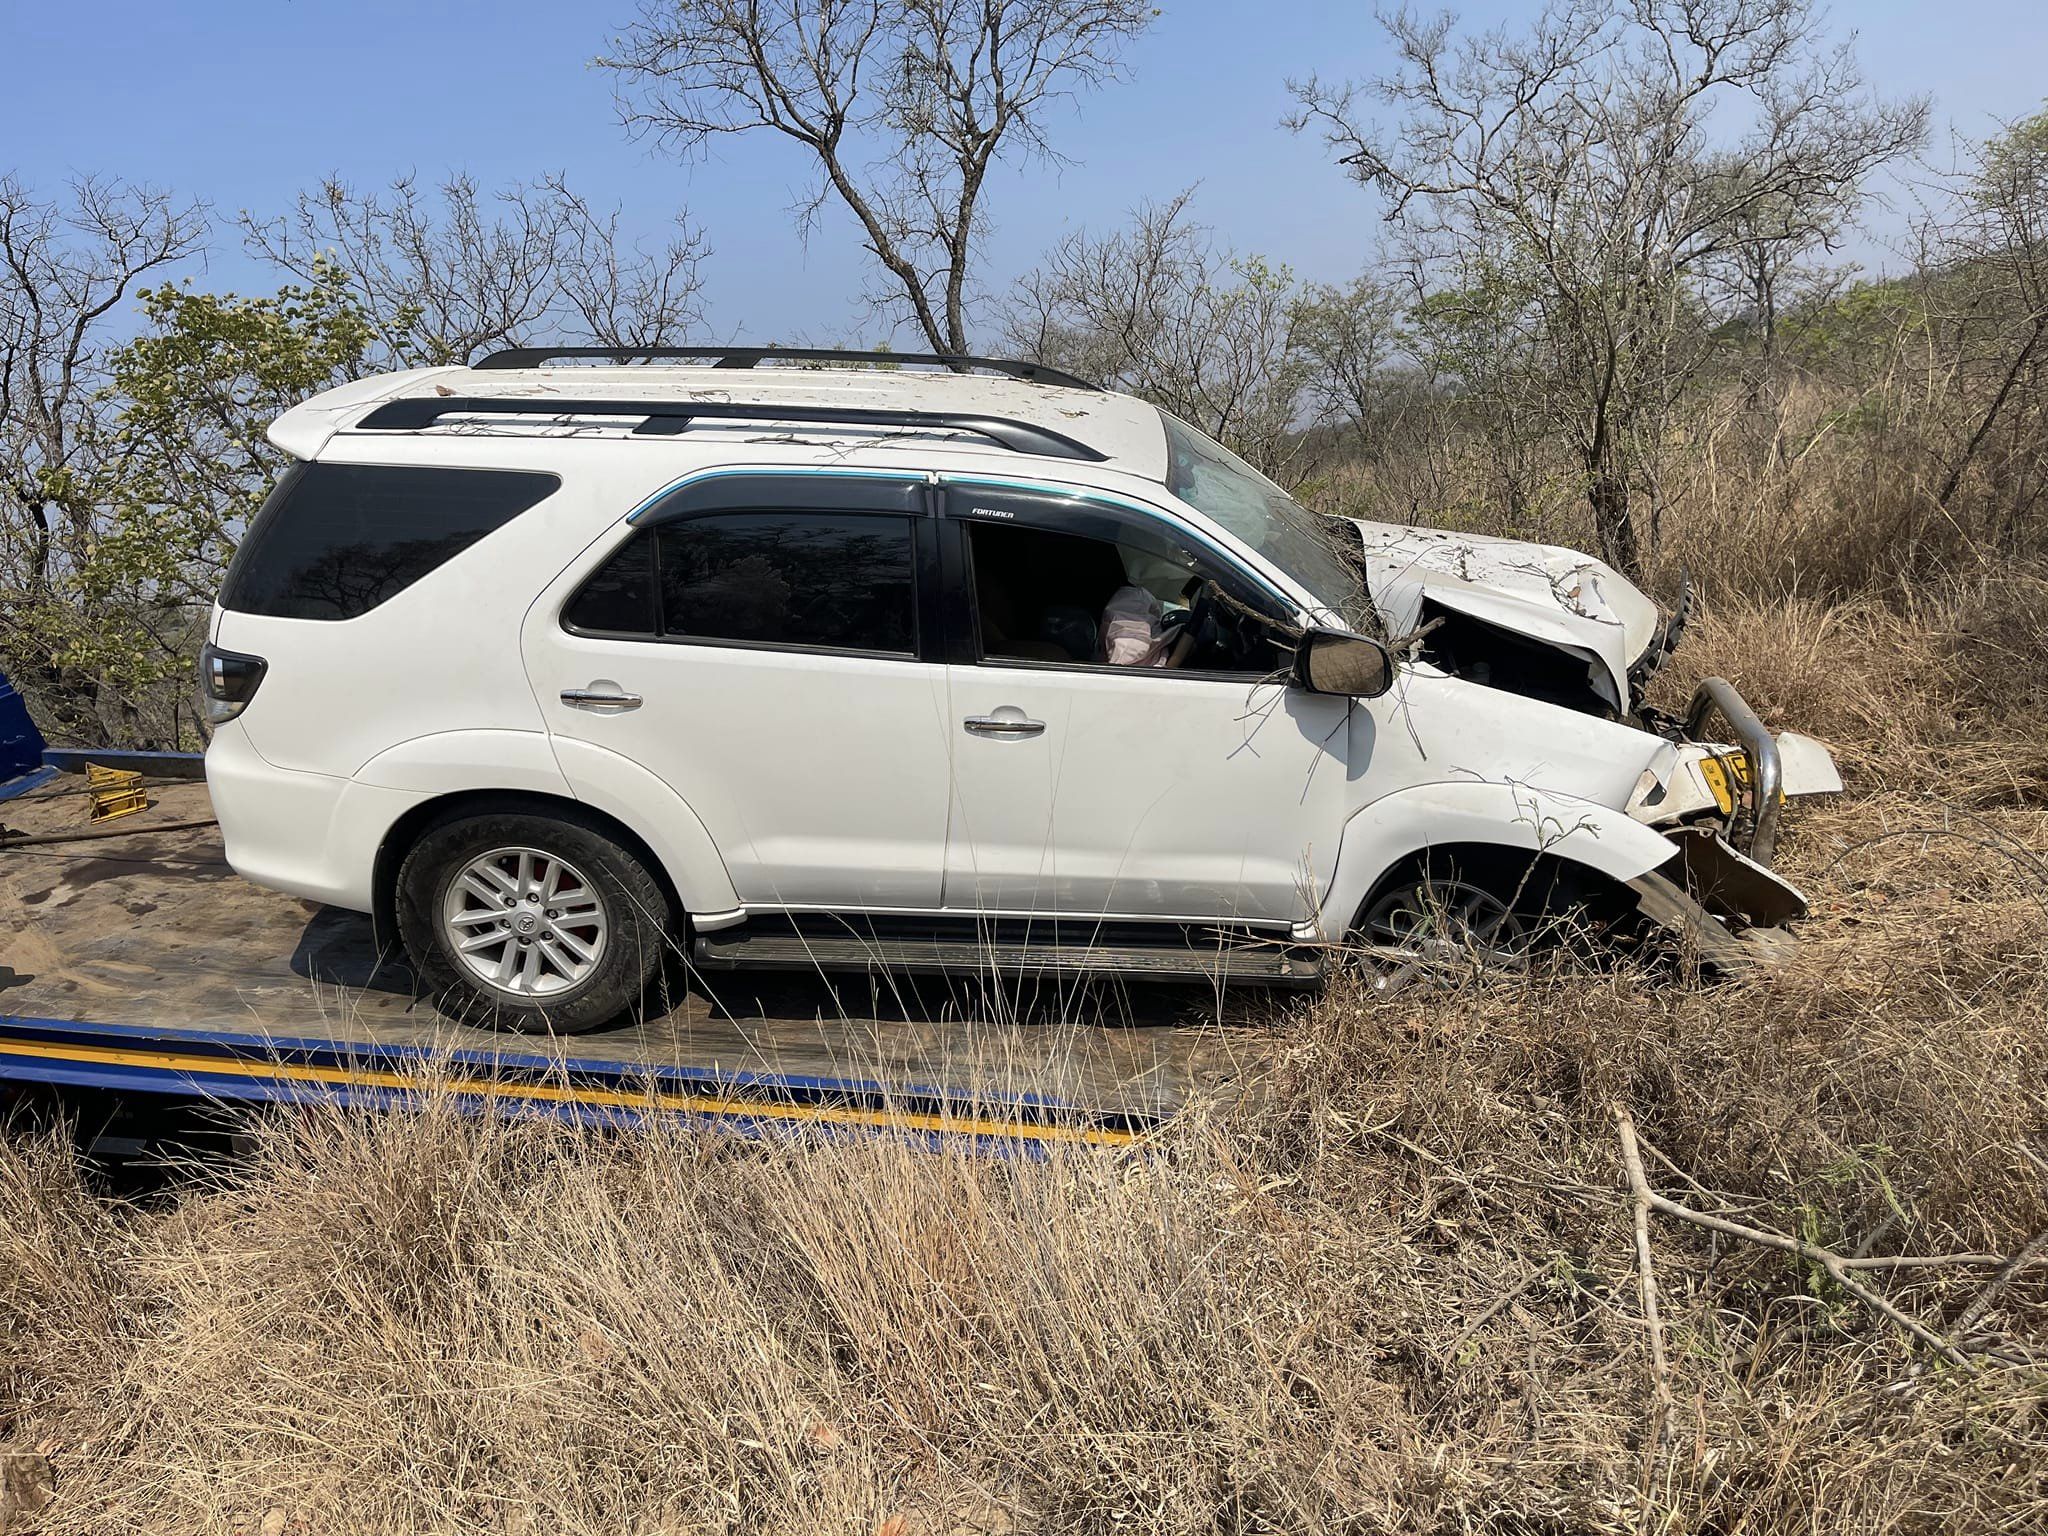 On the same day comedienne Madam Boss was involved in accident, Zimdancehall singer Freeman has moved to clarify reports that he had been involved in a separate accident that saw his white Fortuner damaged. Freeman insisted it was a cousin's friend who drove his car and crashed it.